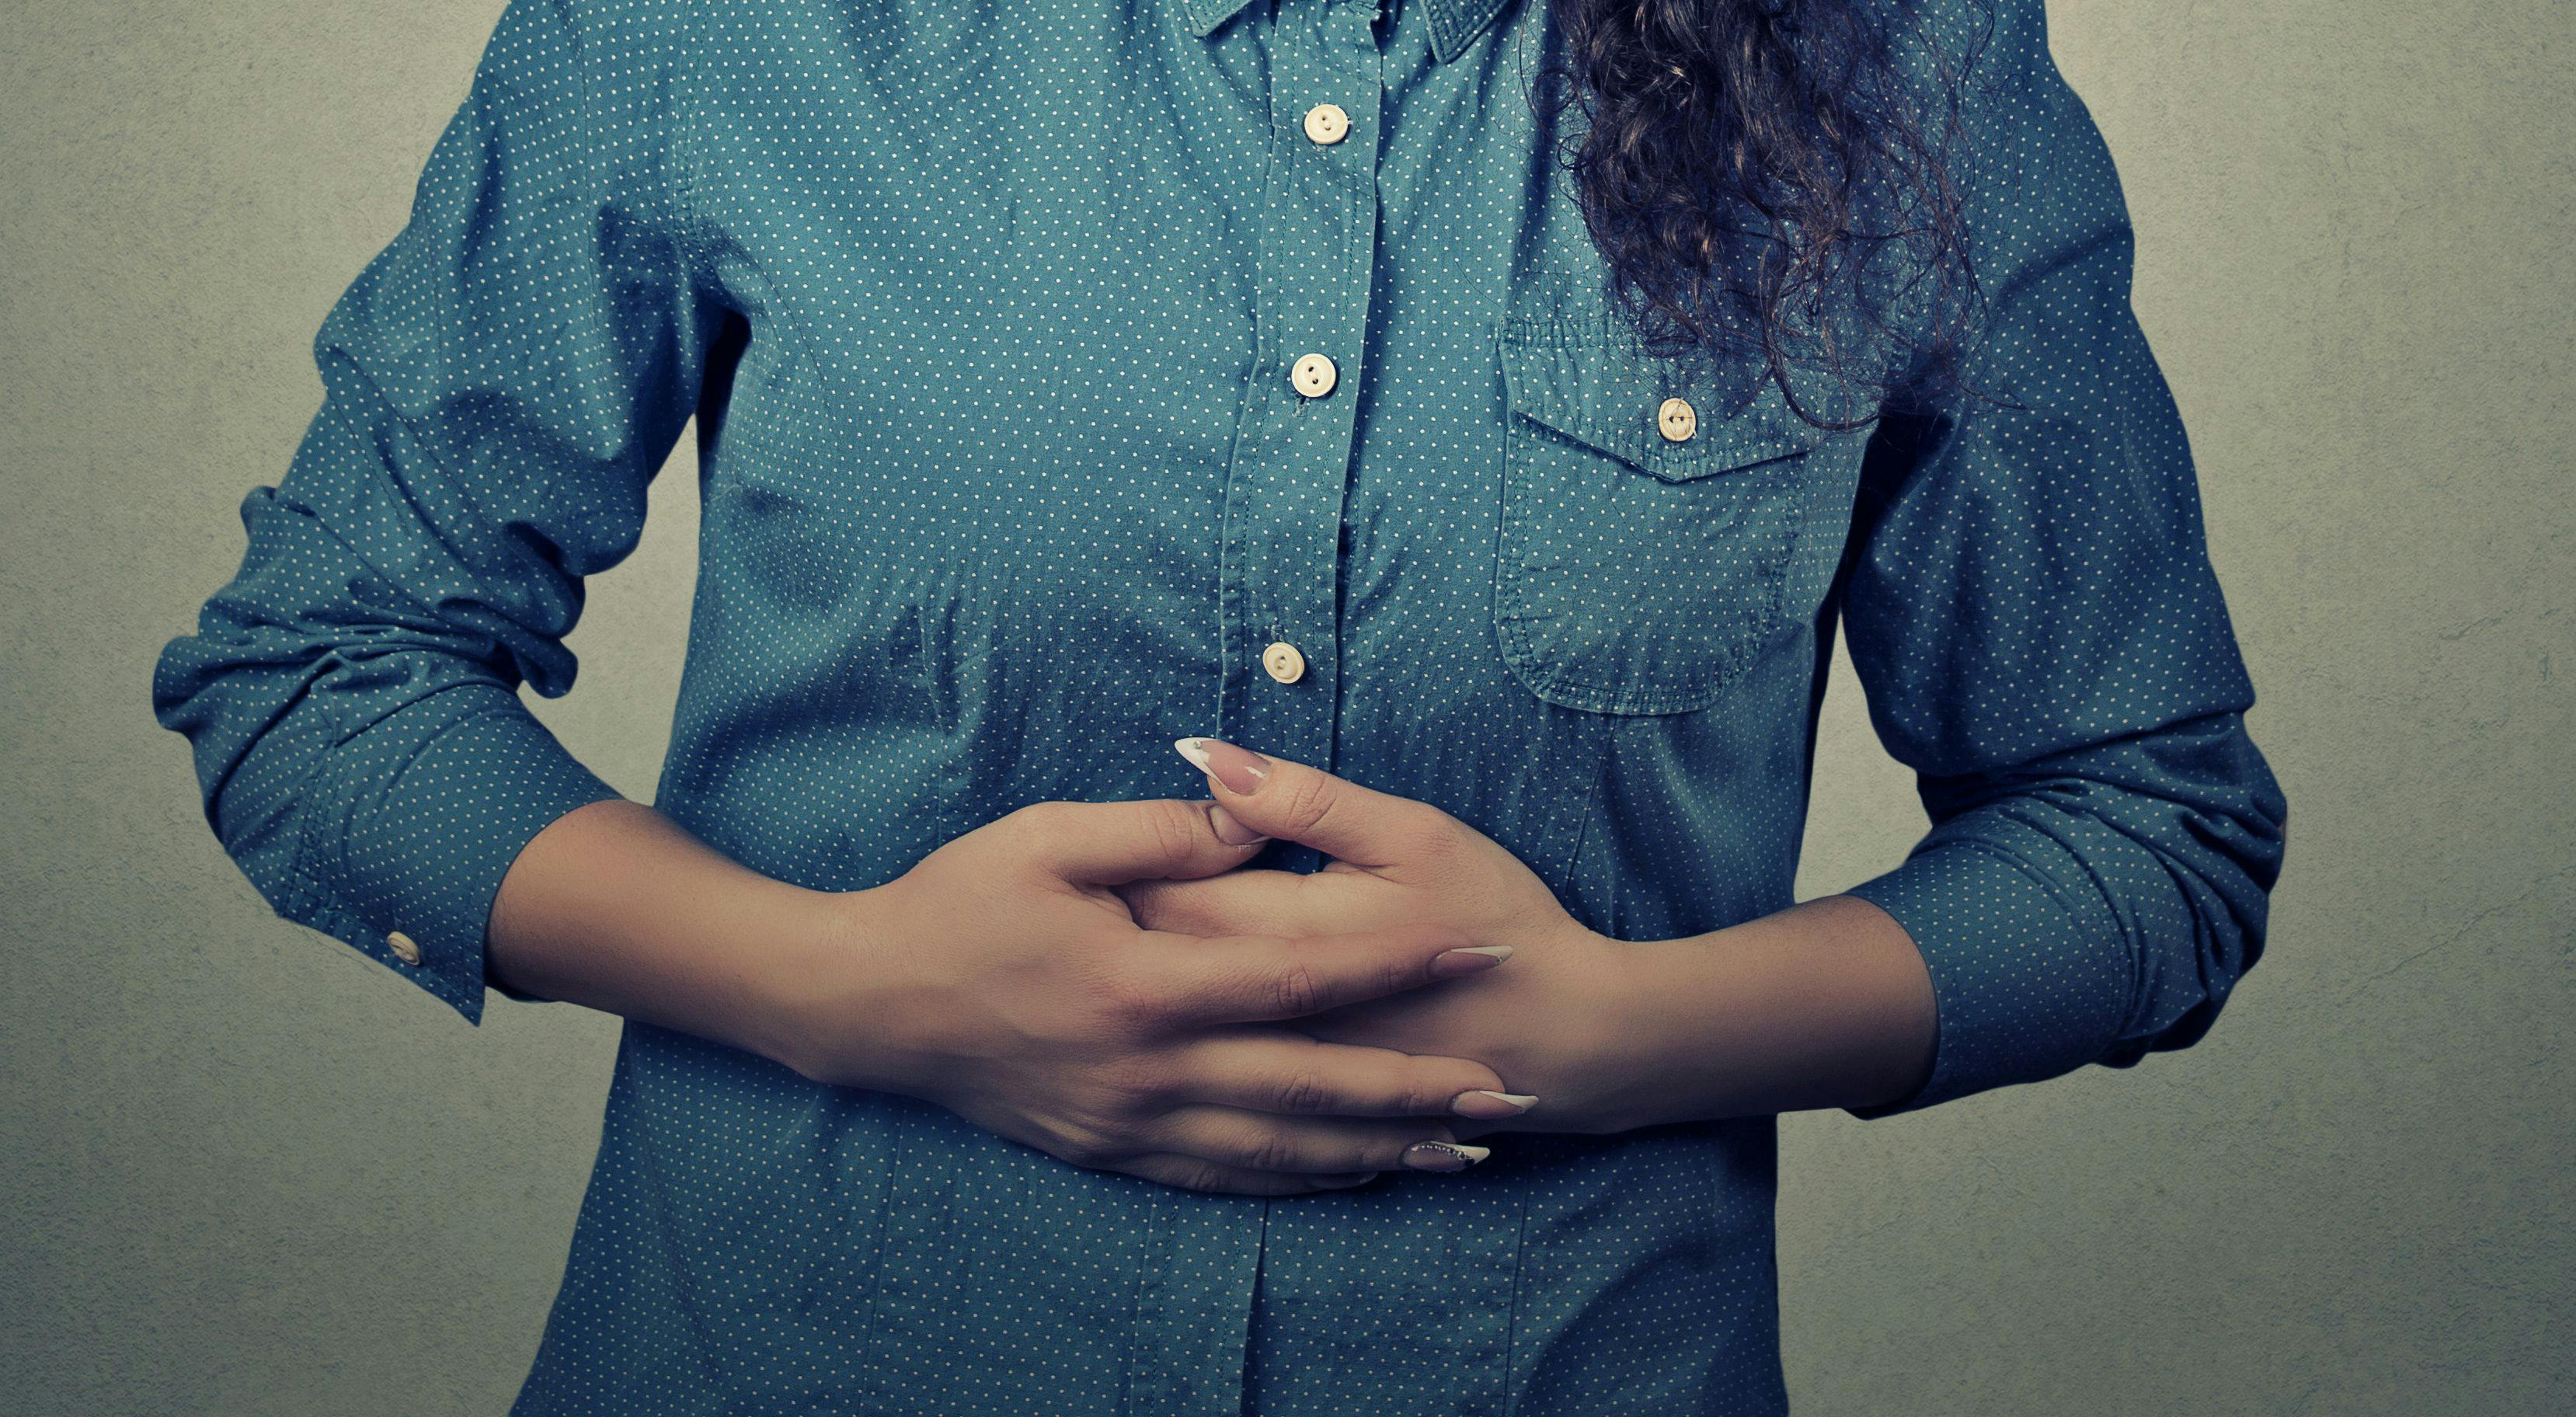 Cramps or Cancer: Elevated Menstrual Pain May be Associated with Ovarian Cancer Risk